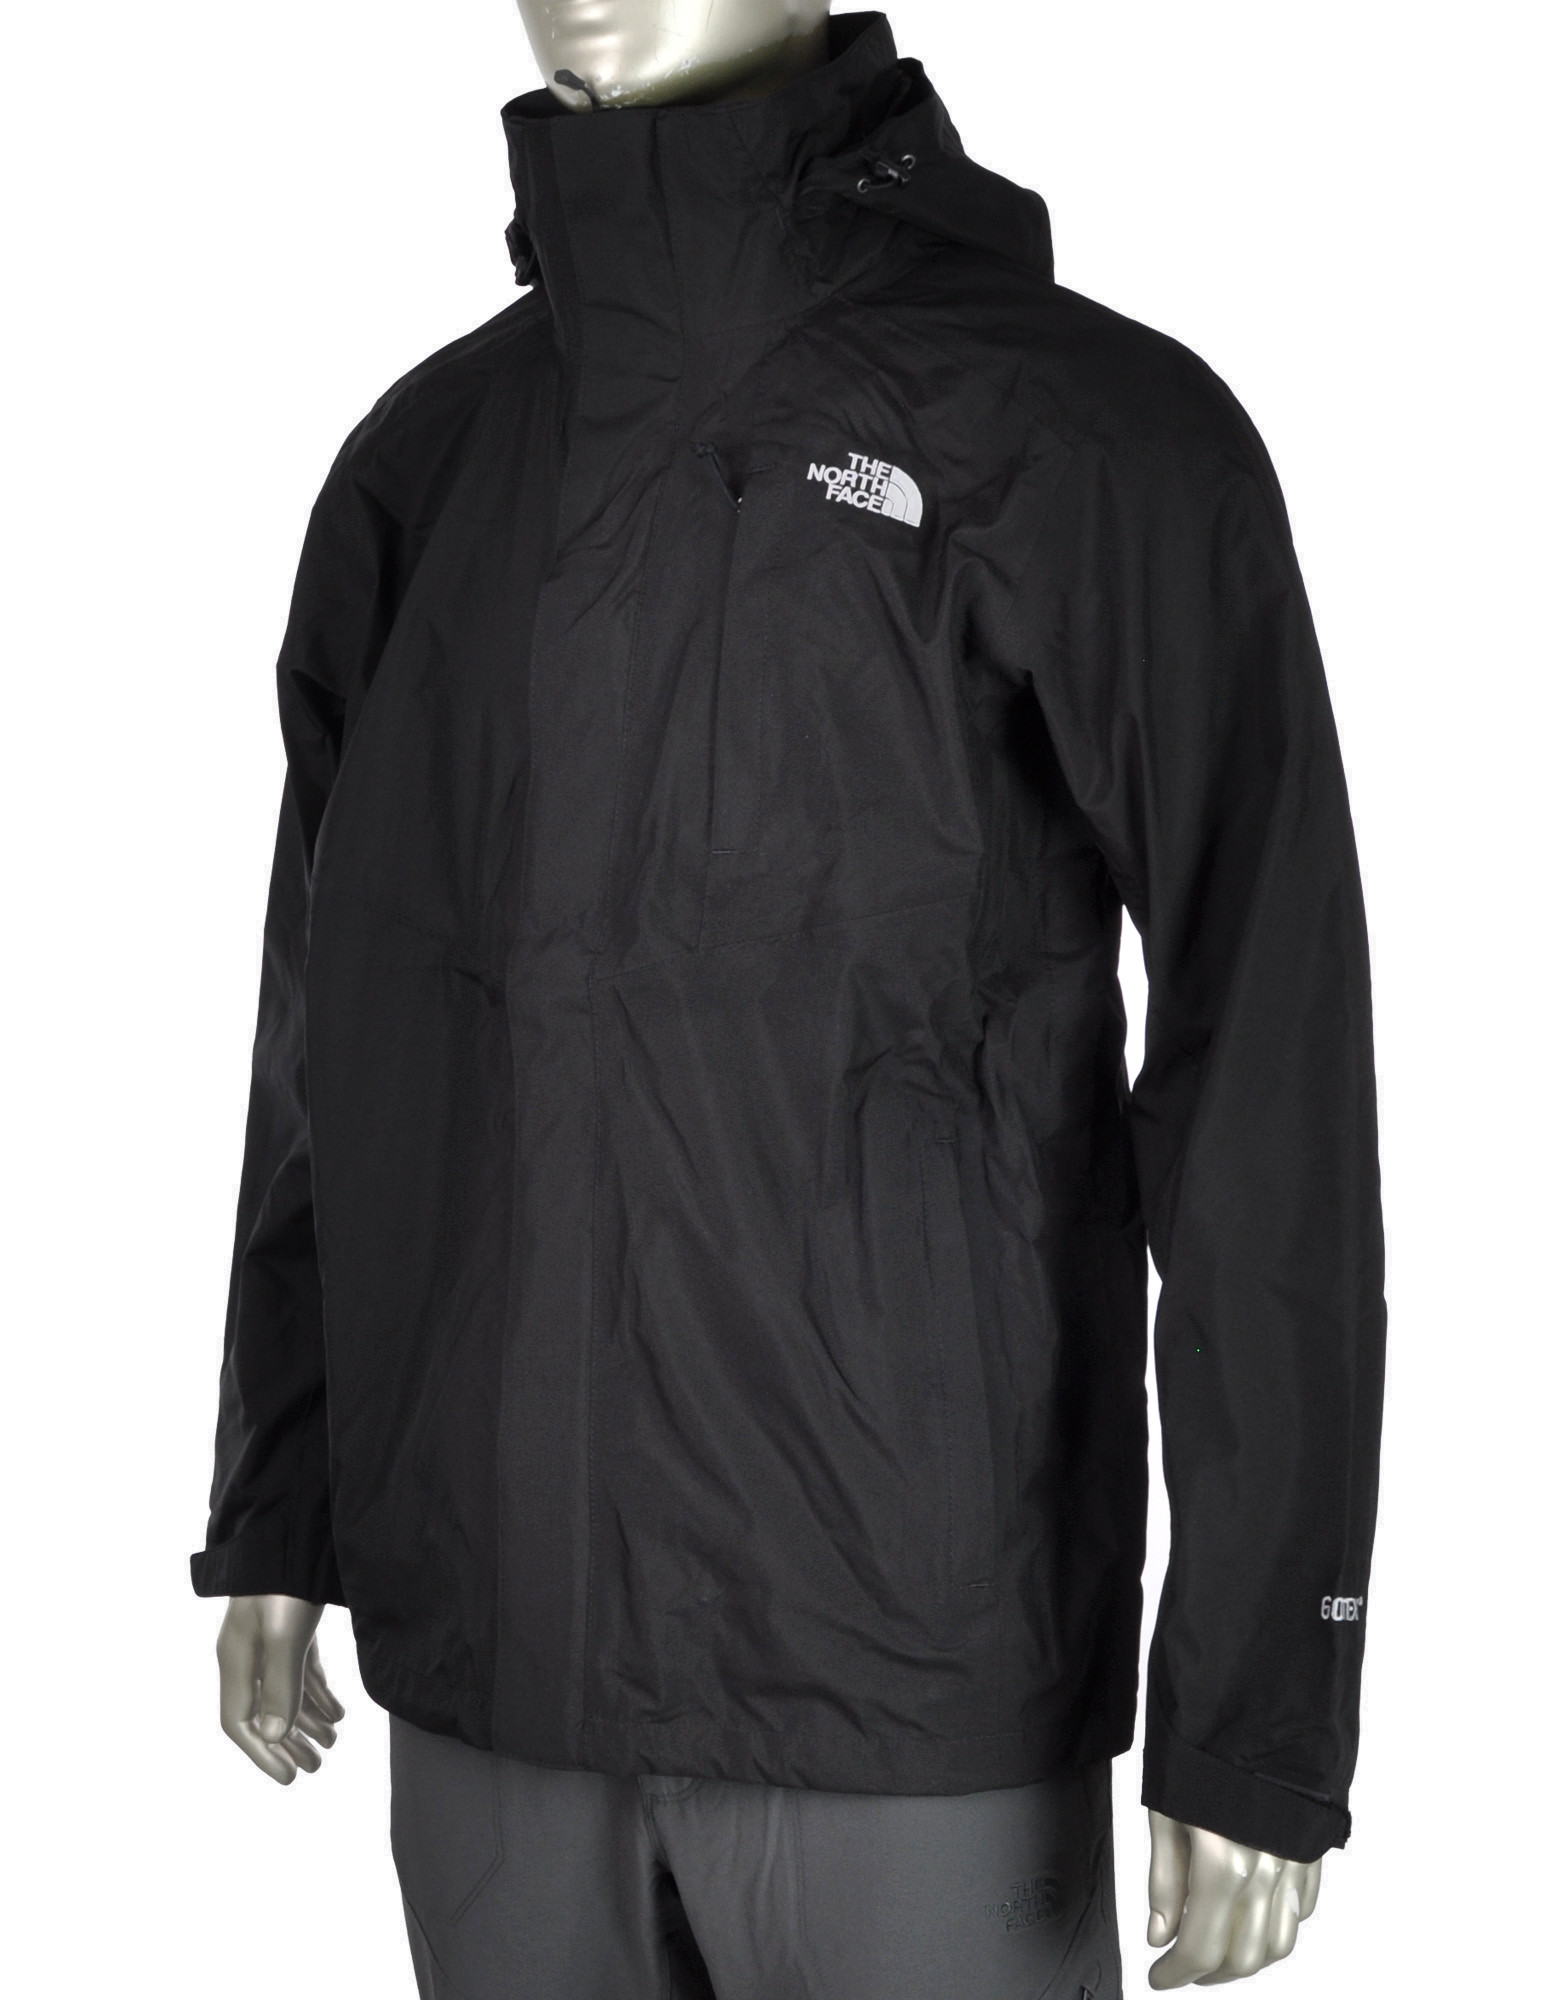 M All Terrain Jacket by THE NORTH FACE (colour: black)